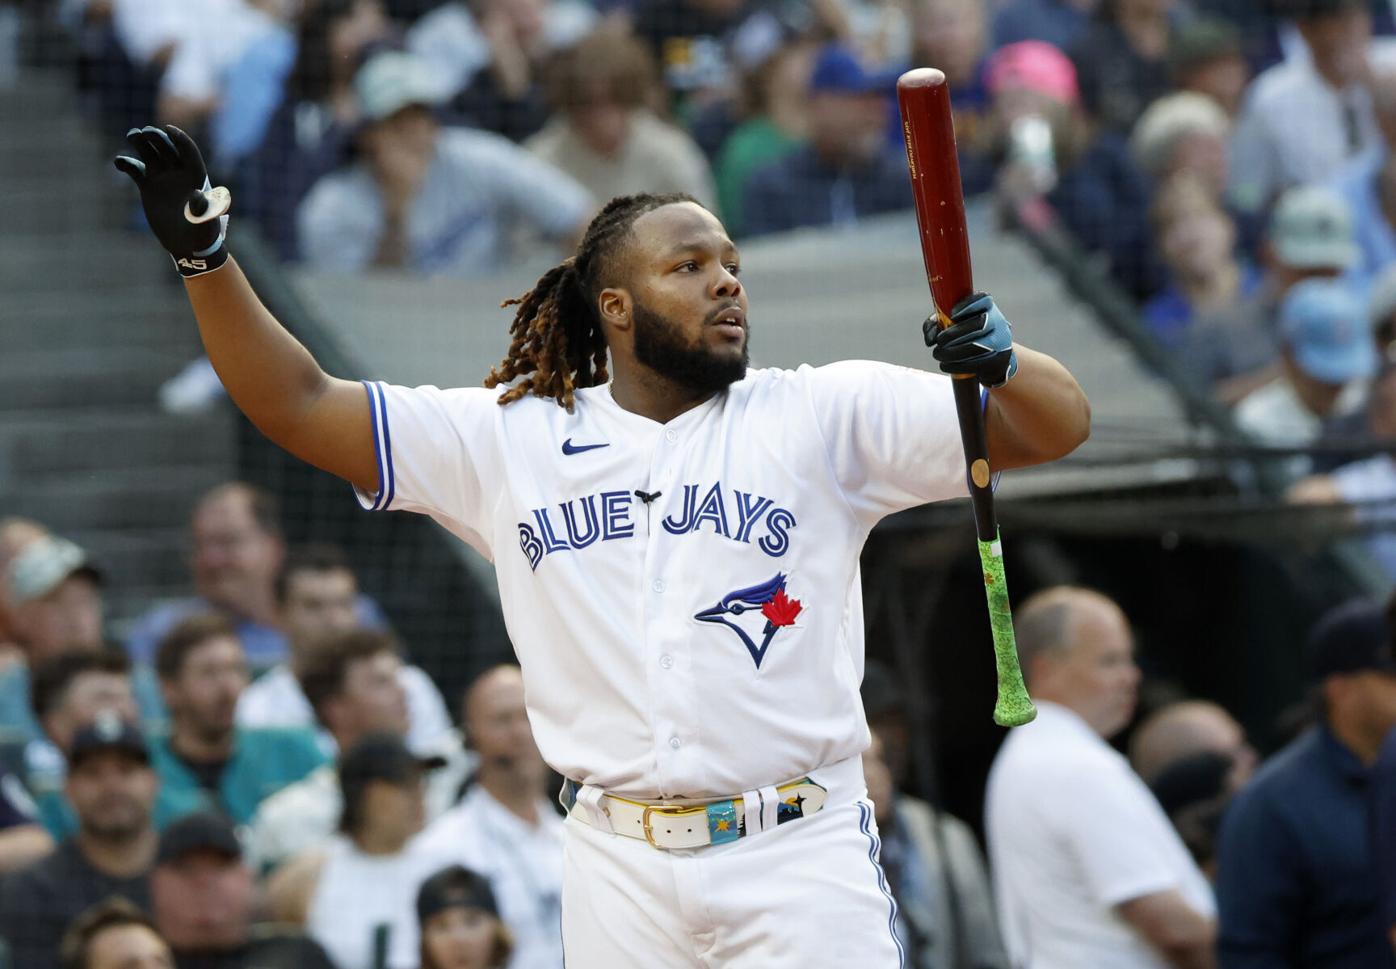 Vladimir Guerrero Jr. and Senior become first father-son duo to win MLB  Home Run Derby